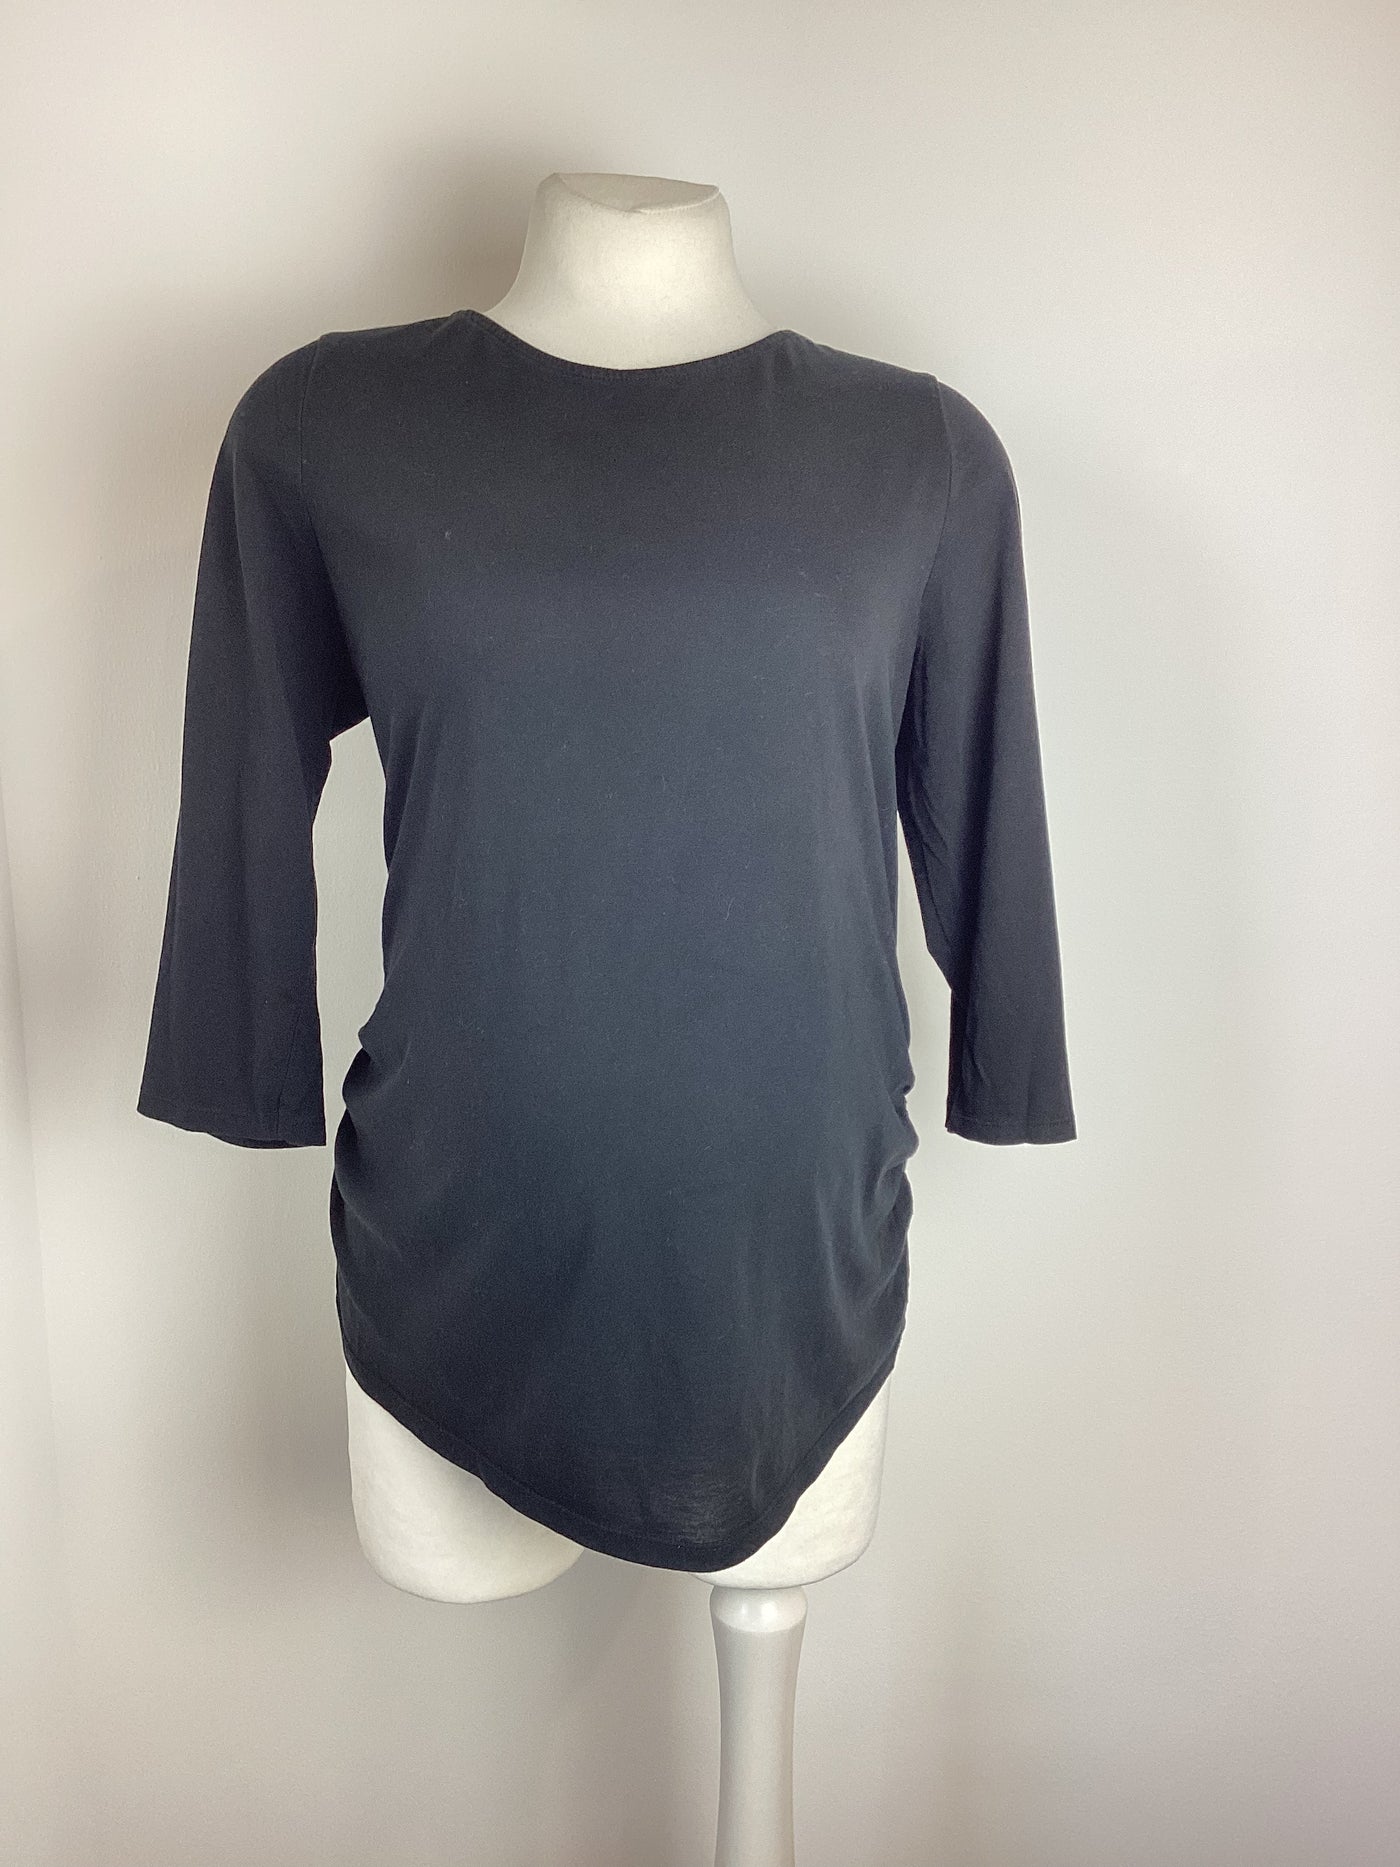 New Look Maternity black 3/4 sleeve top - Size 14